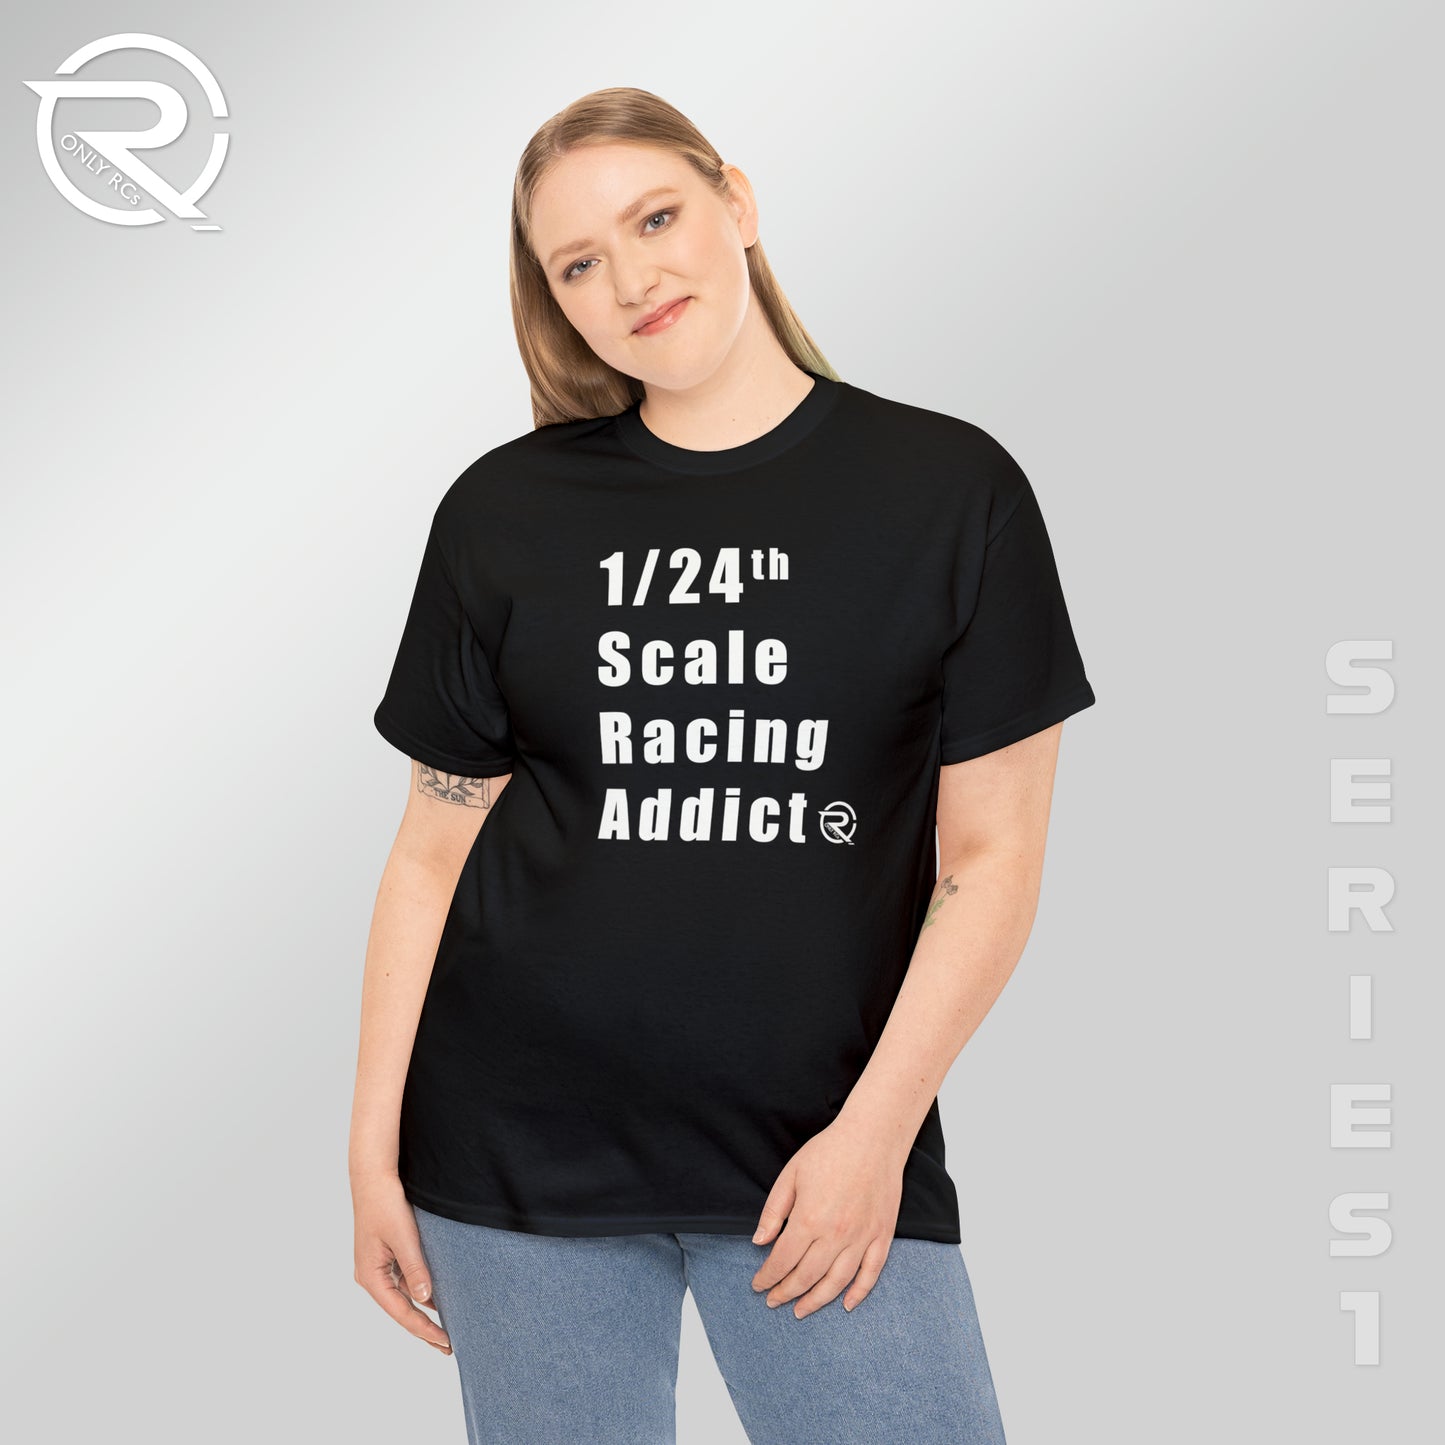 OnlyRCs - 1/24th Scale Racing Addict Heavy Cotton Tee - Series 1